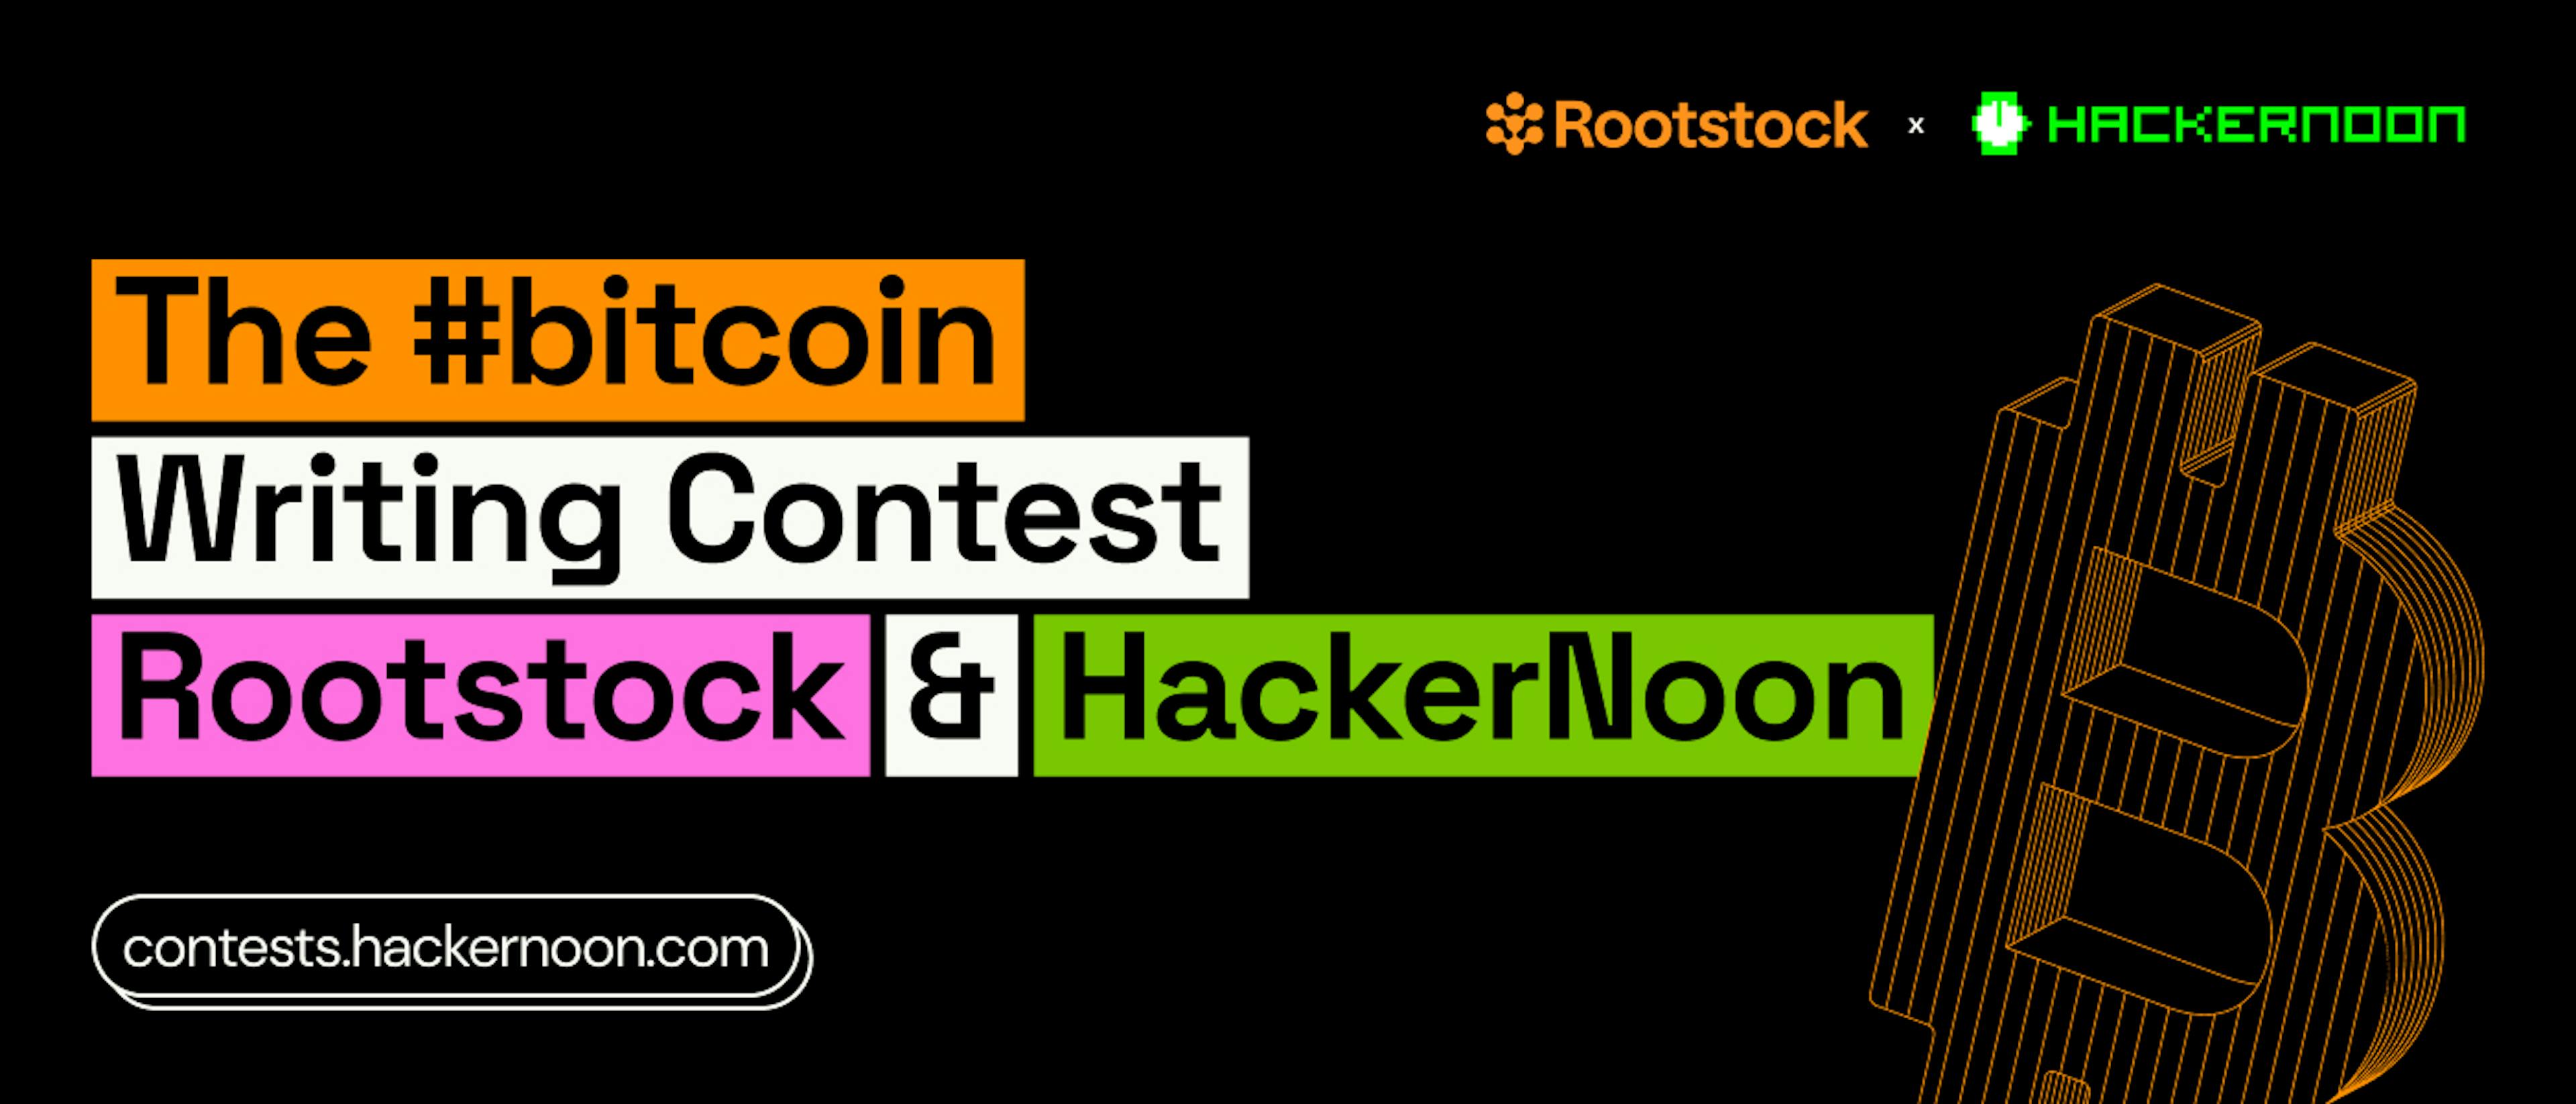 featured image - Join the #bitcoin Writing Contest by Rootstock and HackerNoon, Win Your Share of $17,500